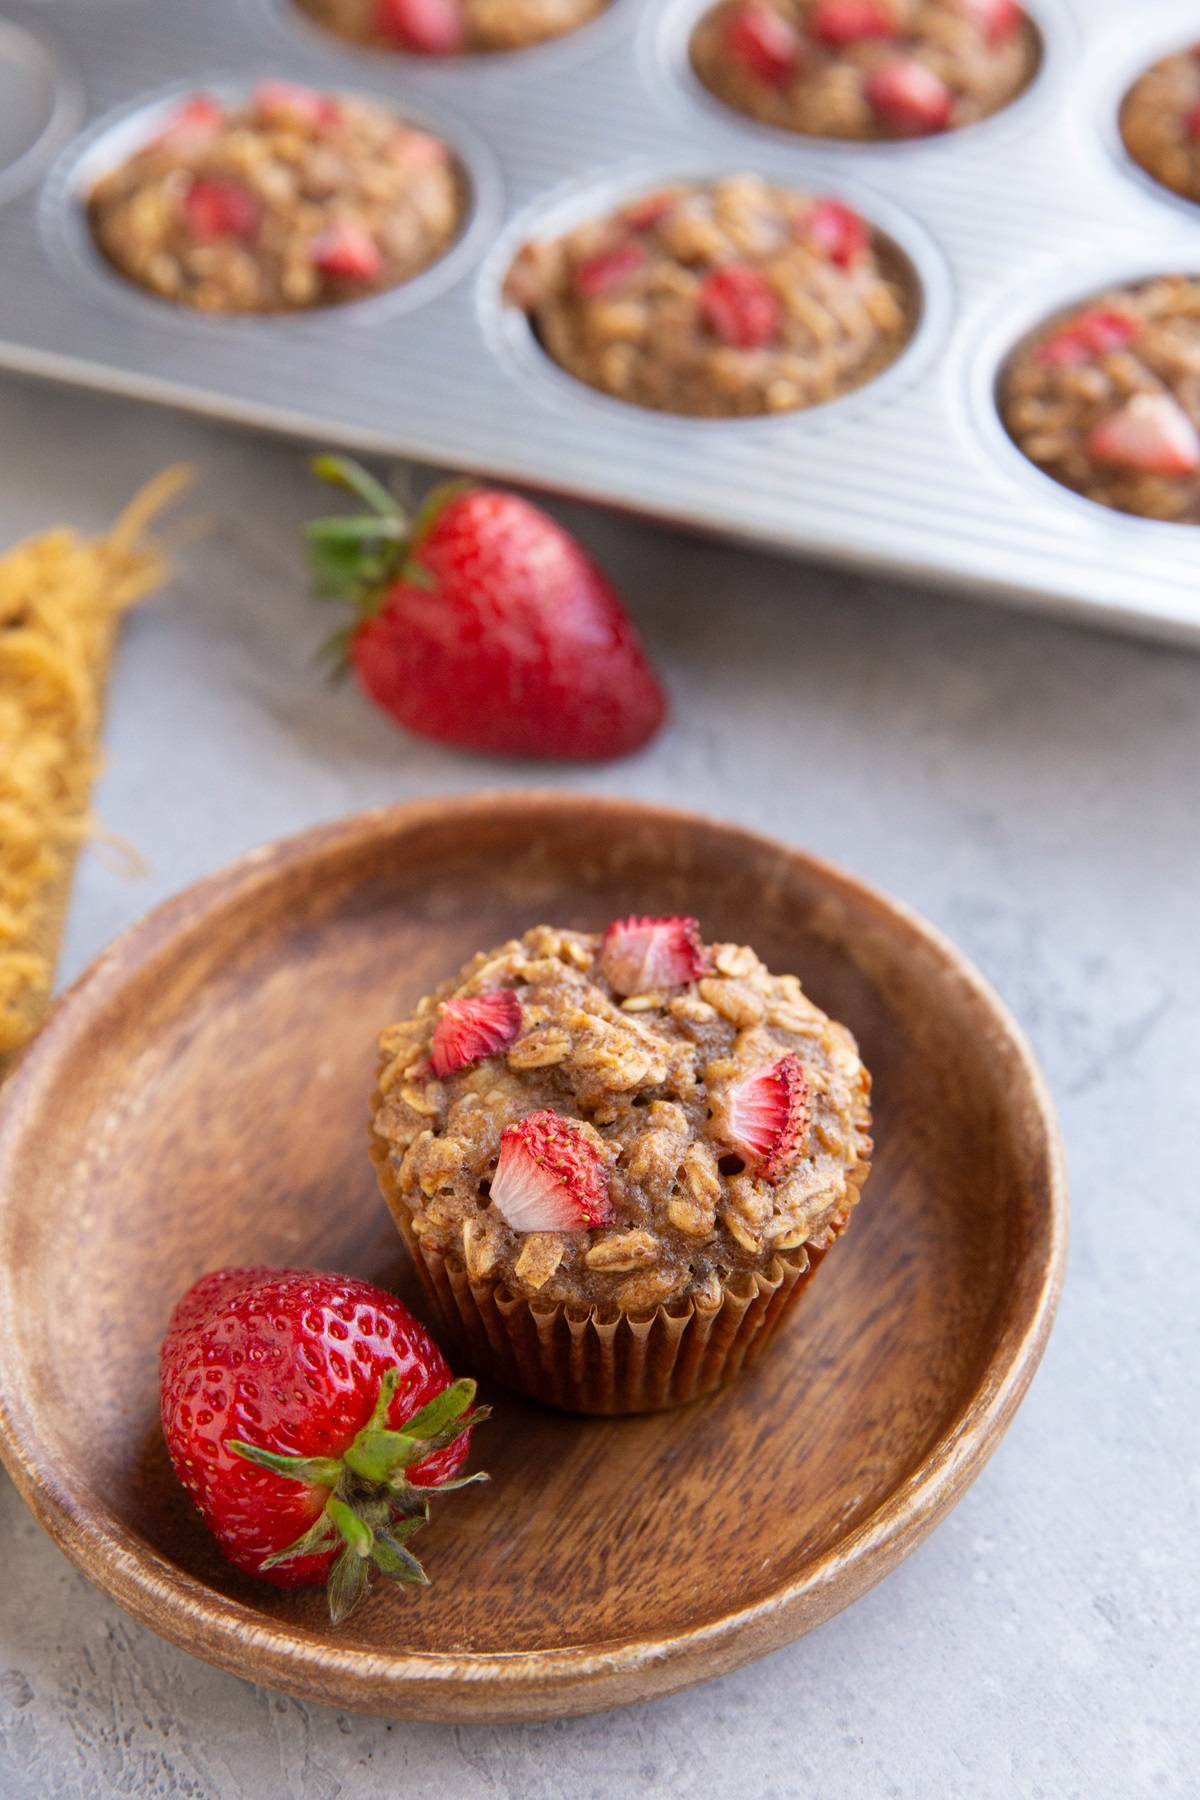 Strawberry oatmeal banana muffin on a wooden plate with the rest of the muffins in the muffin tray in the background.